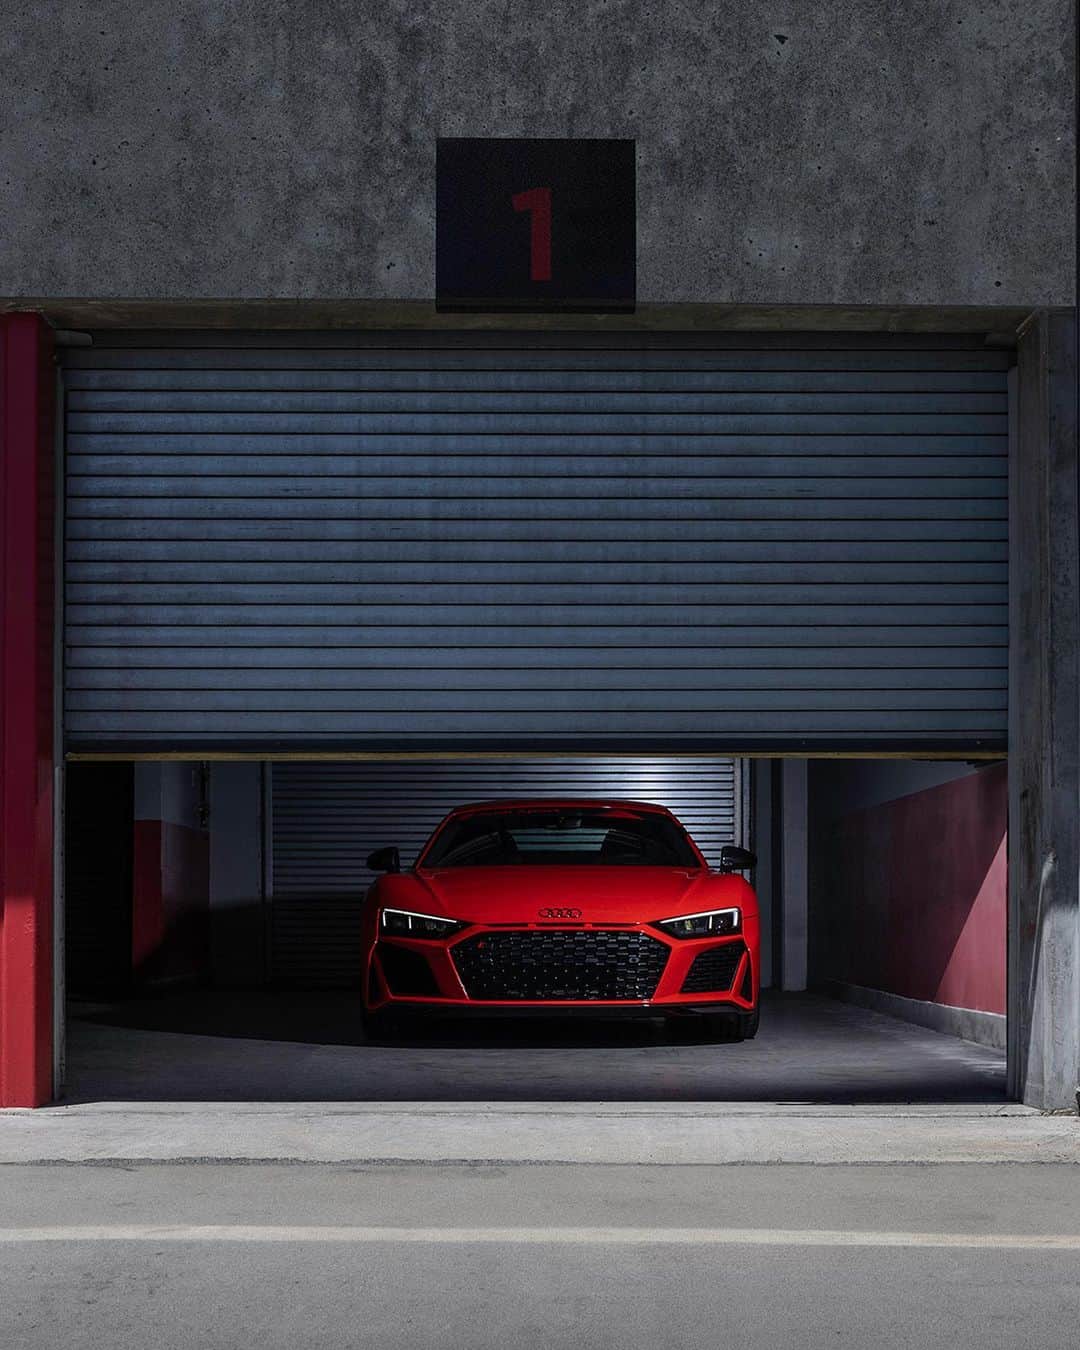 Audiのインスタグラム：「This is the culmination of two decades of performance and track inspired design. The R8 takes its Last Lap. Make your mark on the R8 legacy and help decide how we film the R8 for one more adventure. Go to our Stories to vote 9/12-9/15.  #Audi #AudiR8 #AudiR8LastLap.」